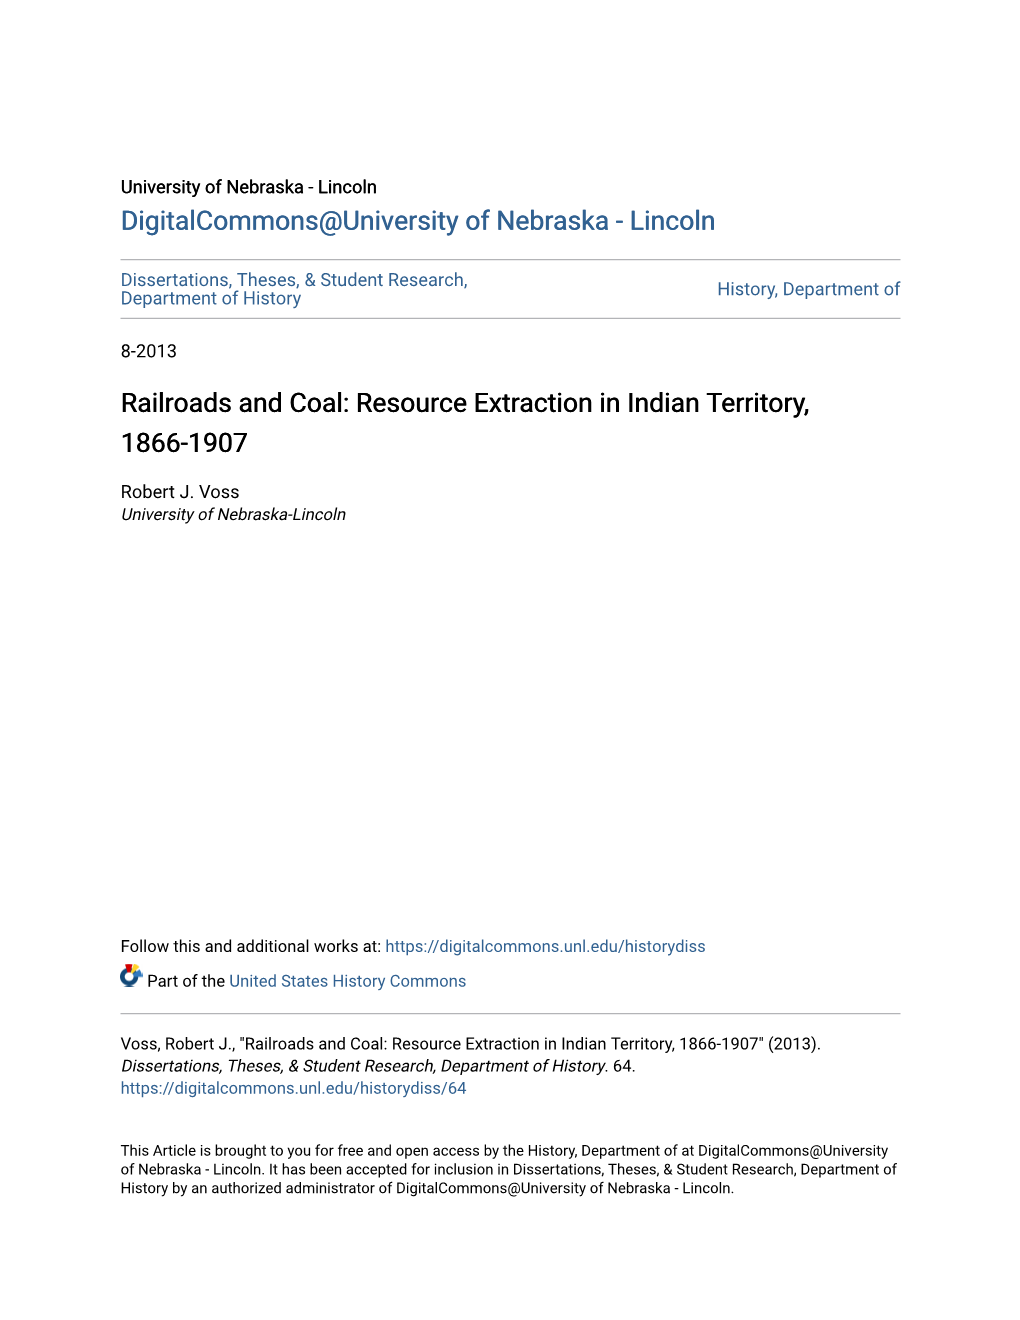 Railroads and Coal: Resource Extraction in Indian Territory, 1866-1907